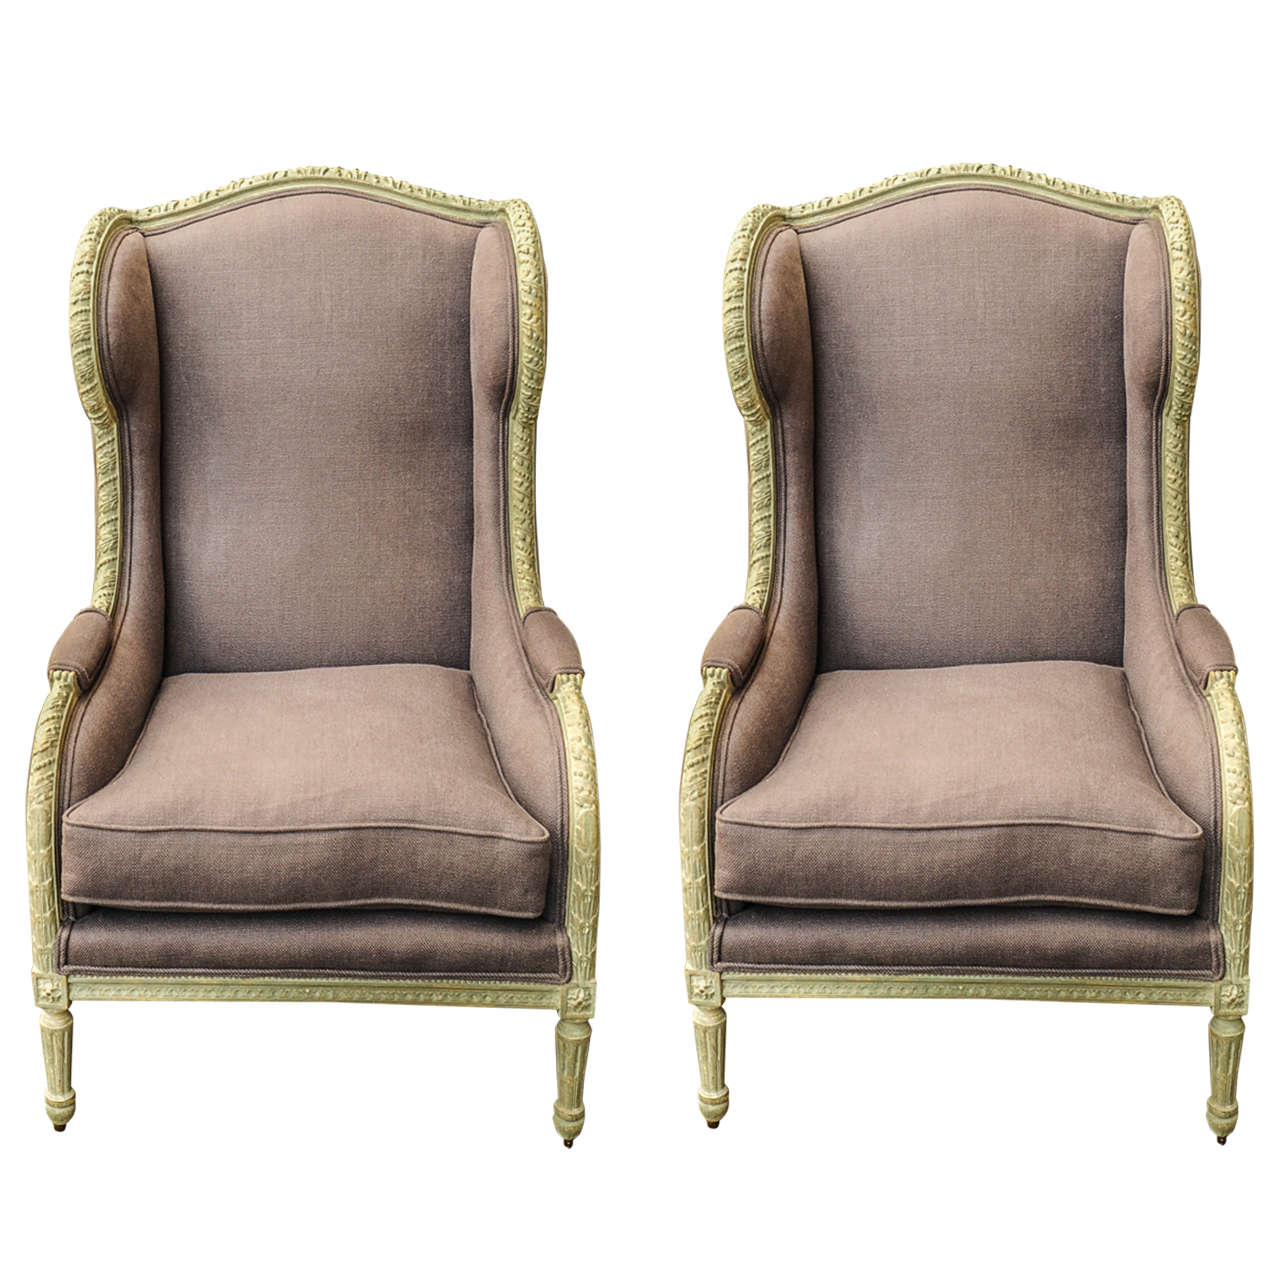 A Pair of 19th Century Louis Seize French Bergeres For Sale